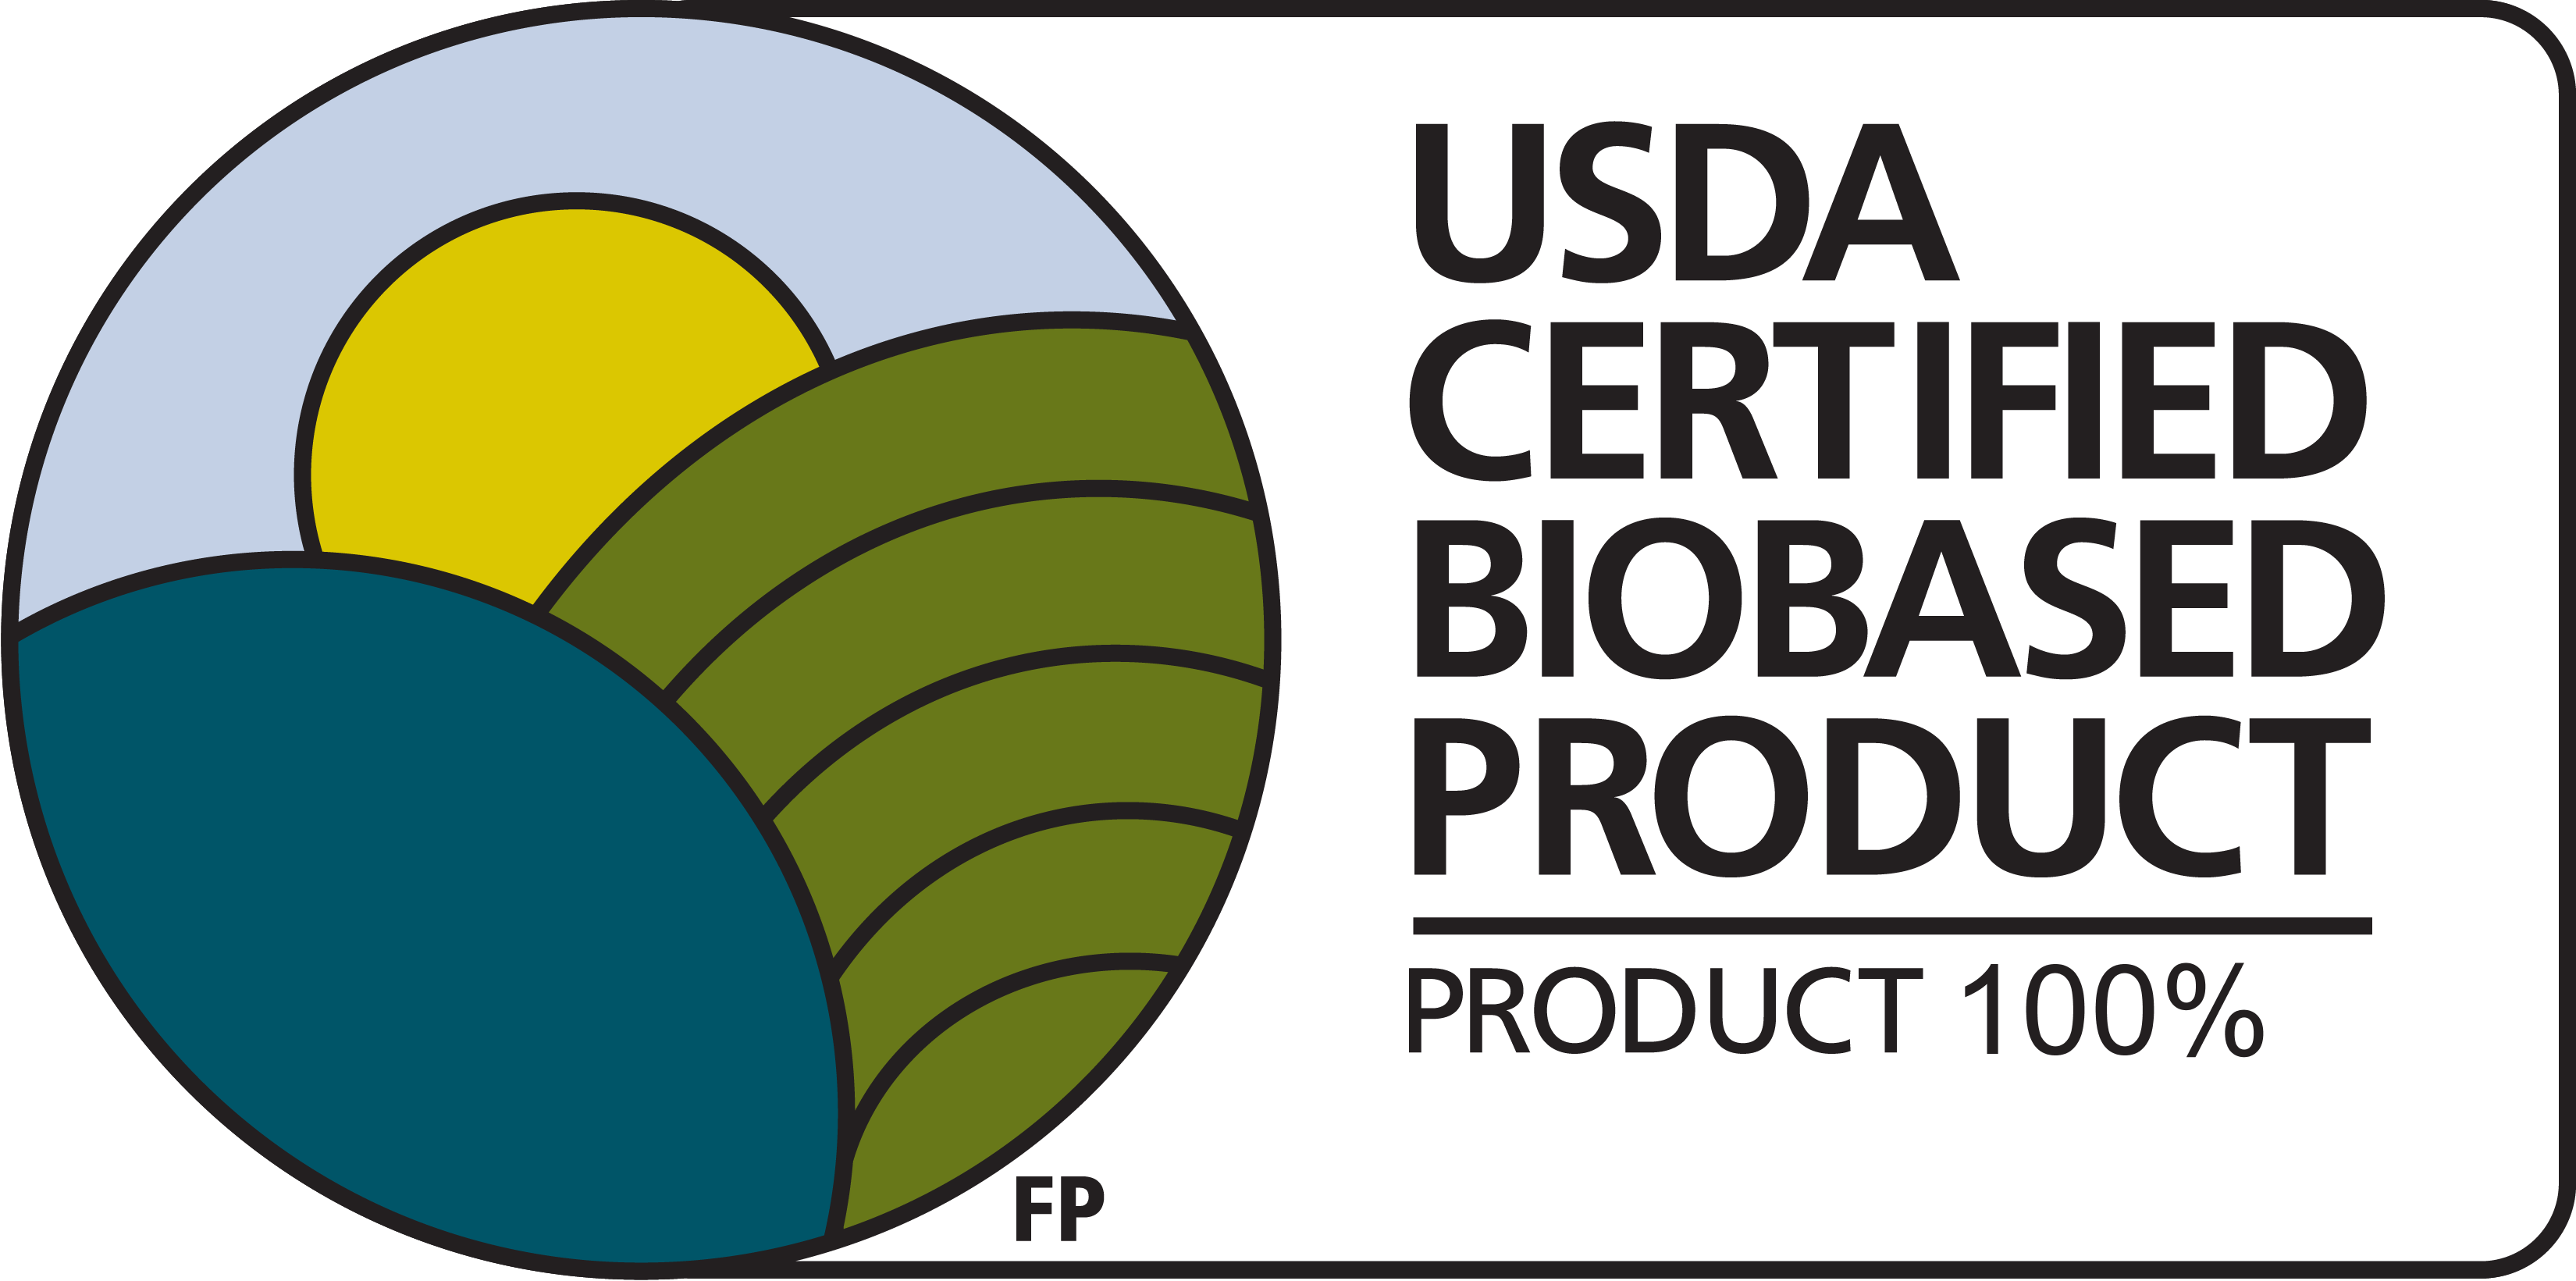 USDA Certified Biobased Product Label for Honest Organic Body Oil